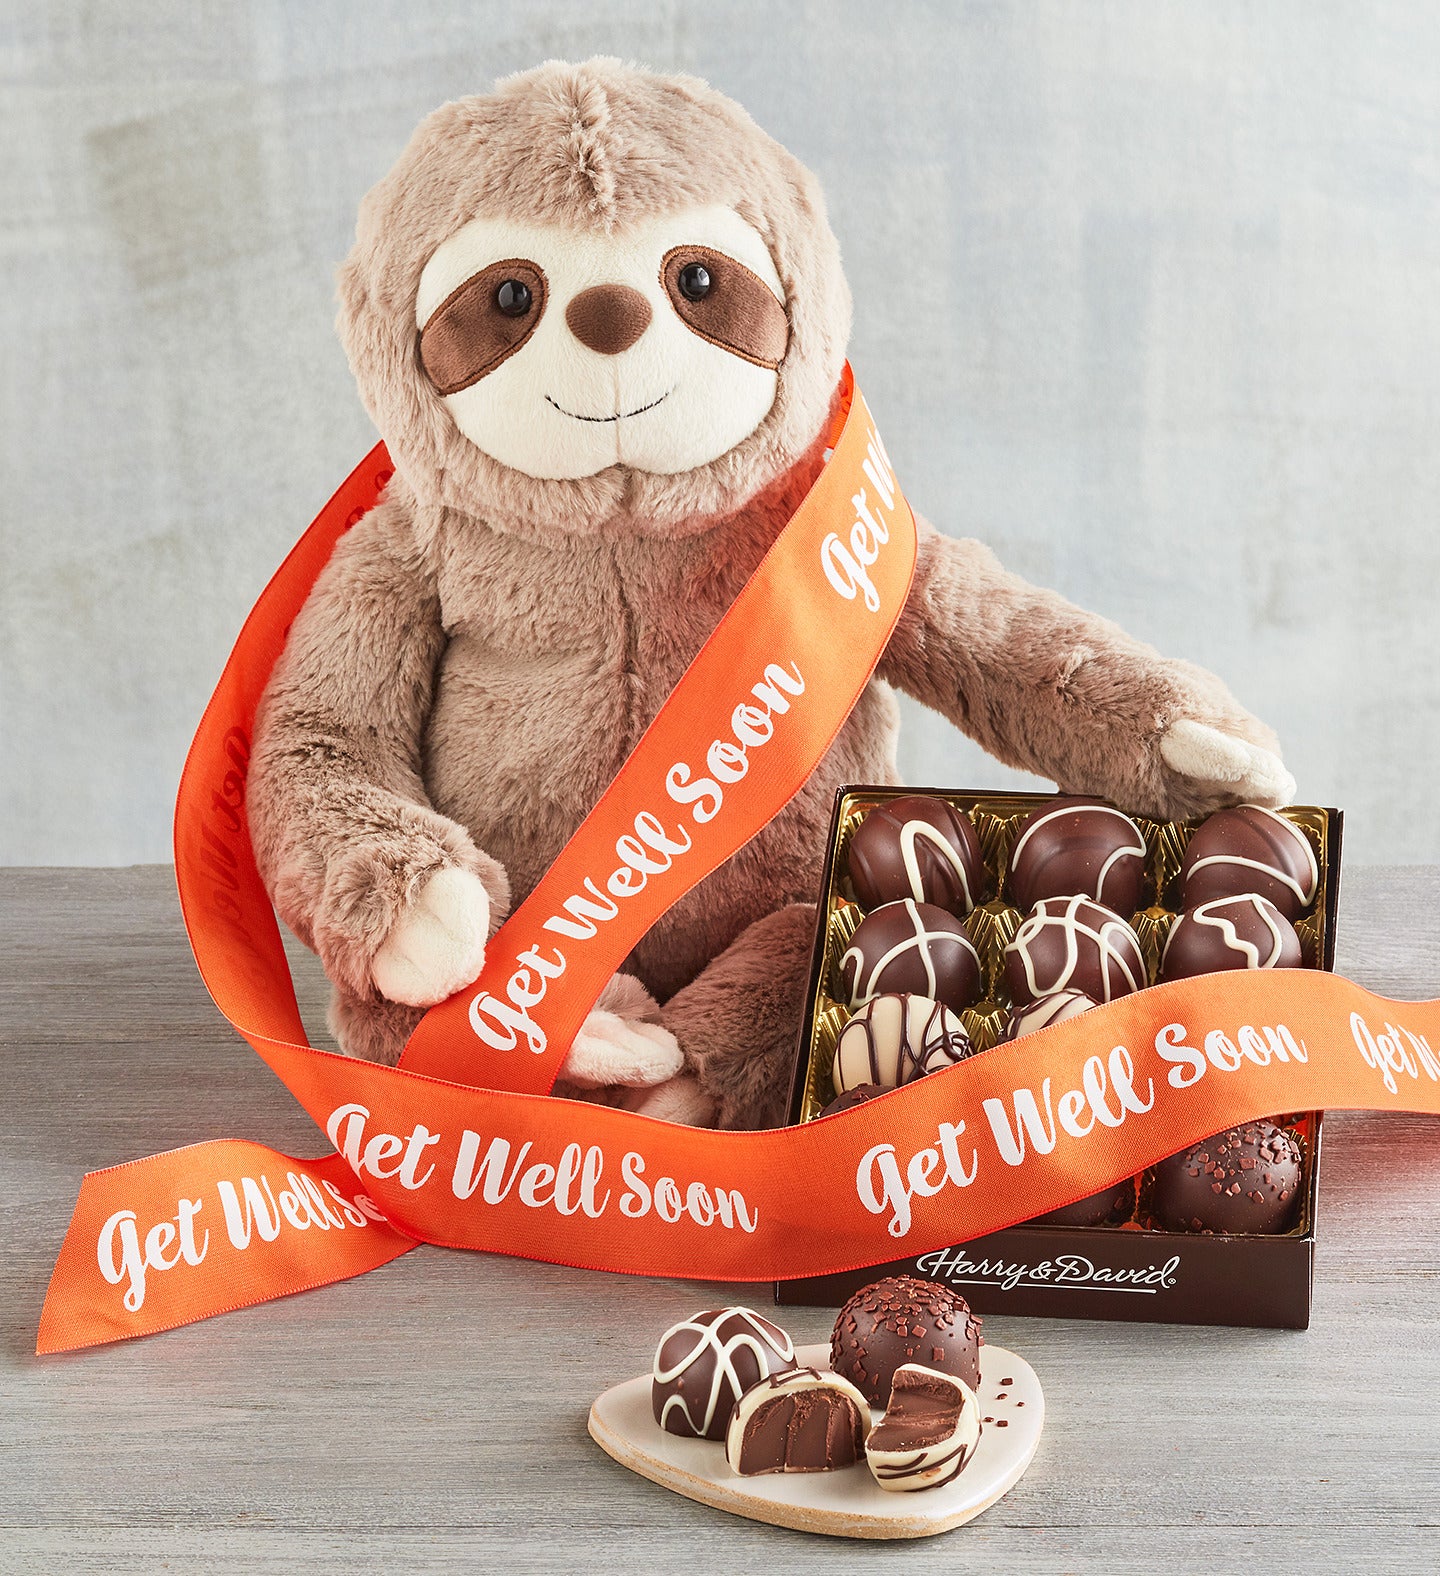 "Get Well" Sloth Plush with Truffles